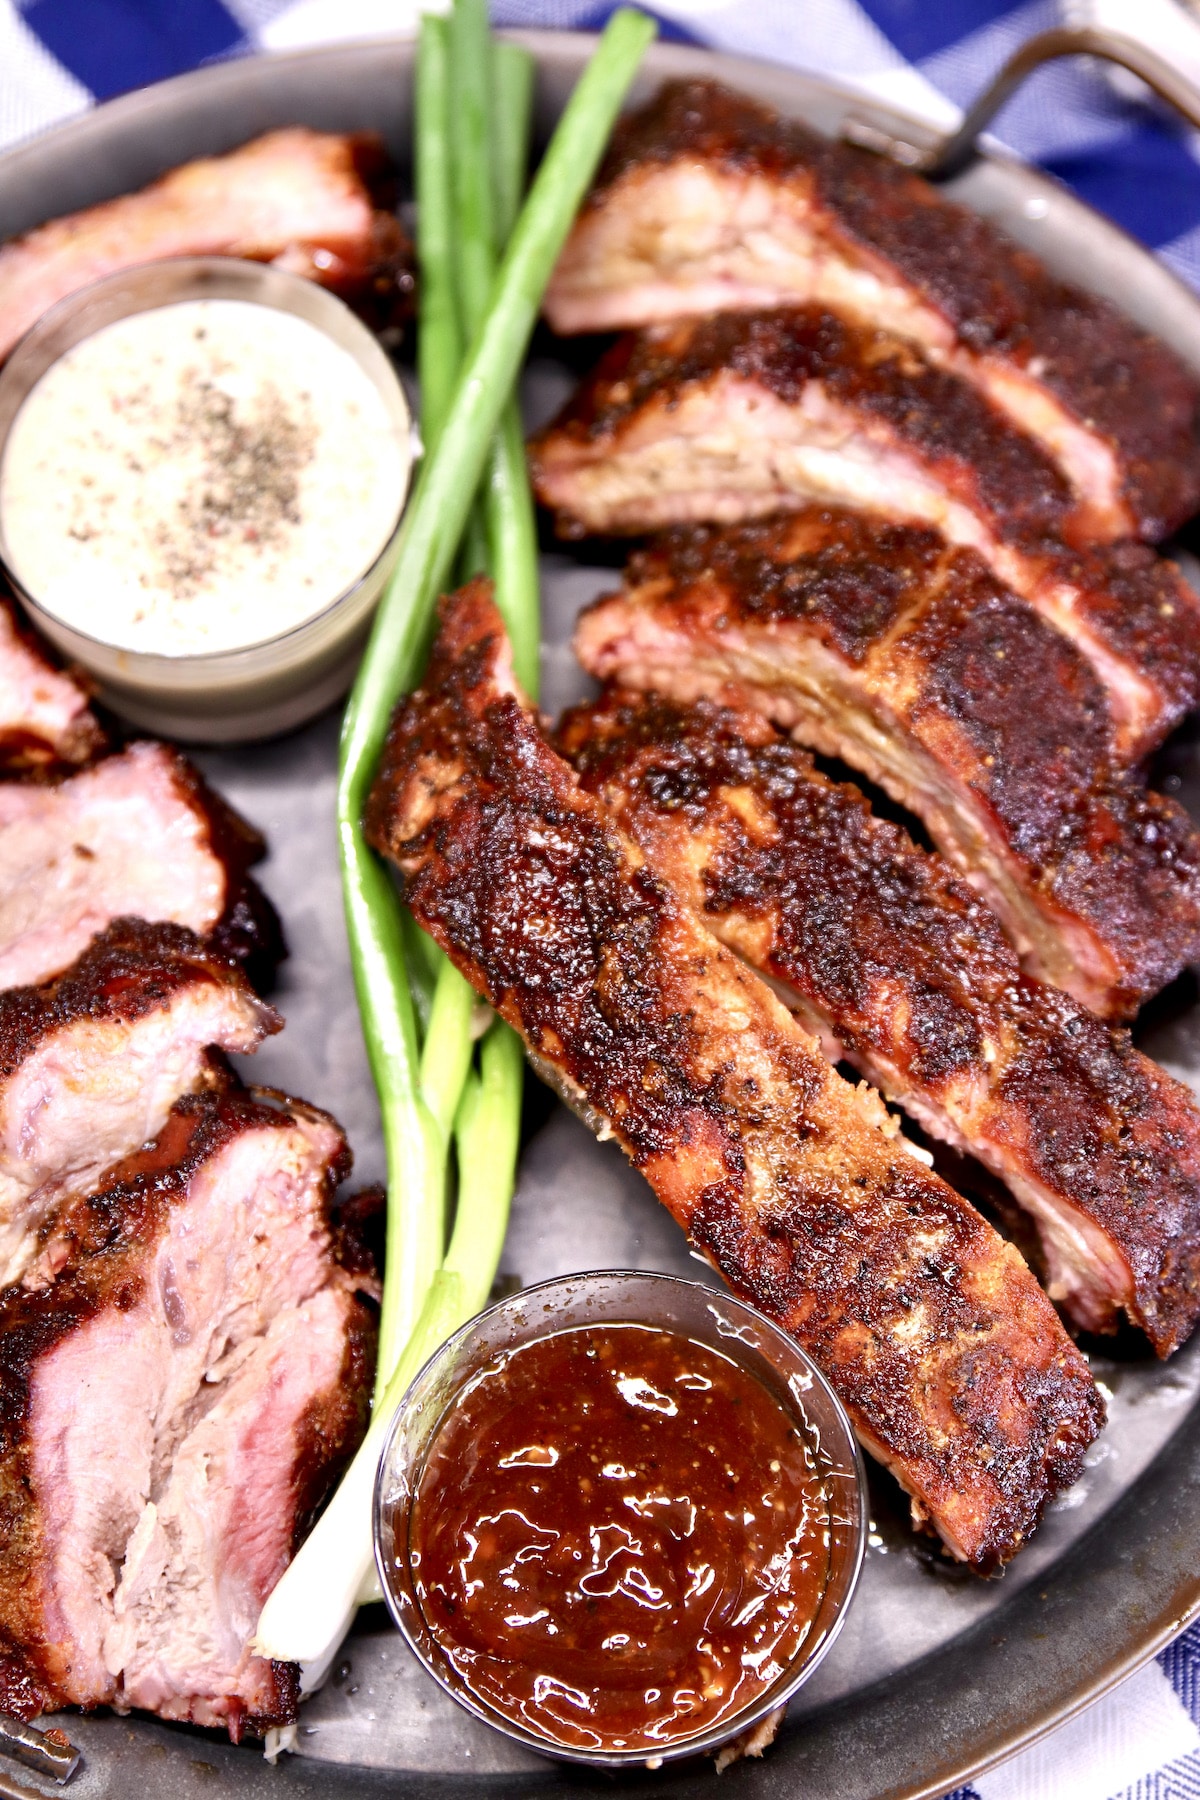 Closeup of platter of sliced baby back ribs, green onions, bowls of sauce.